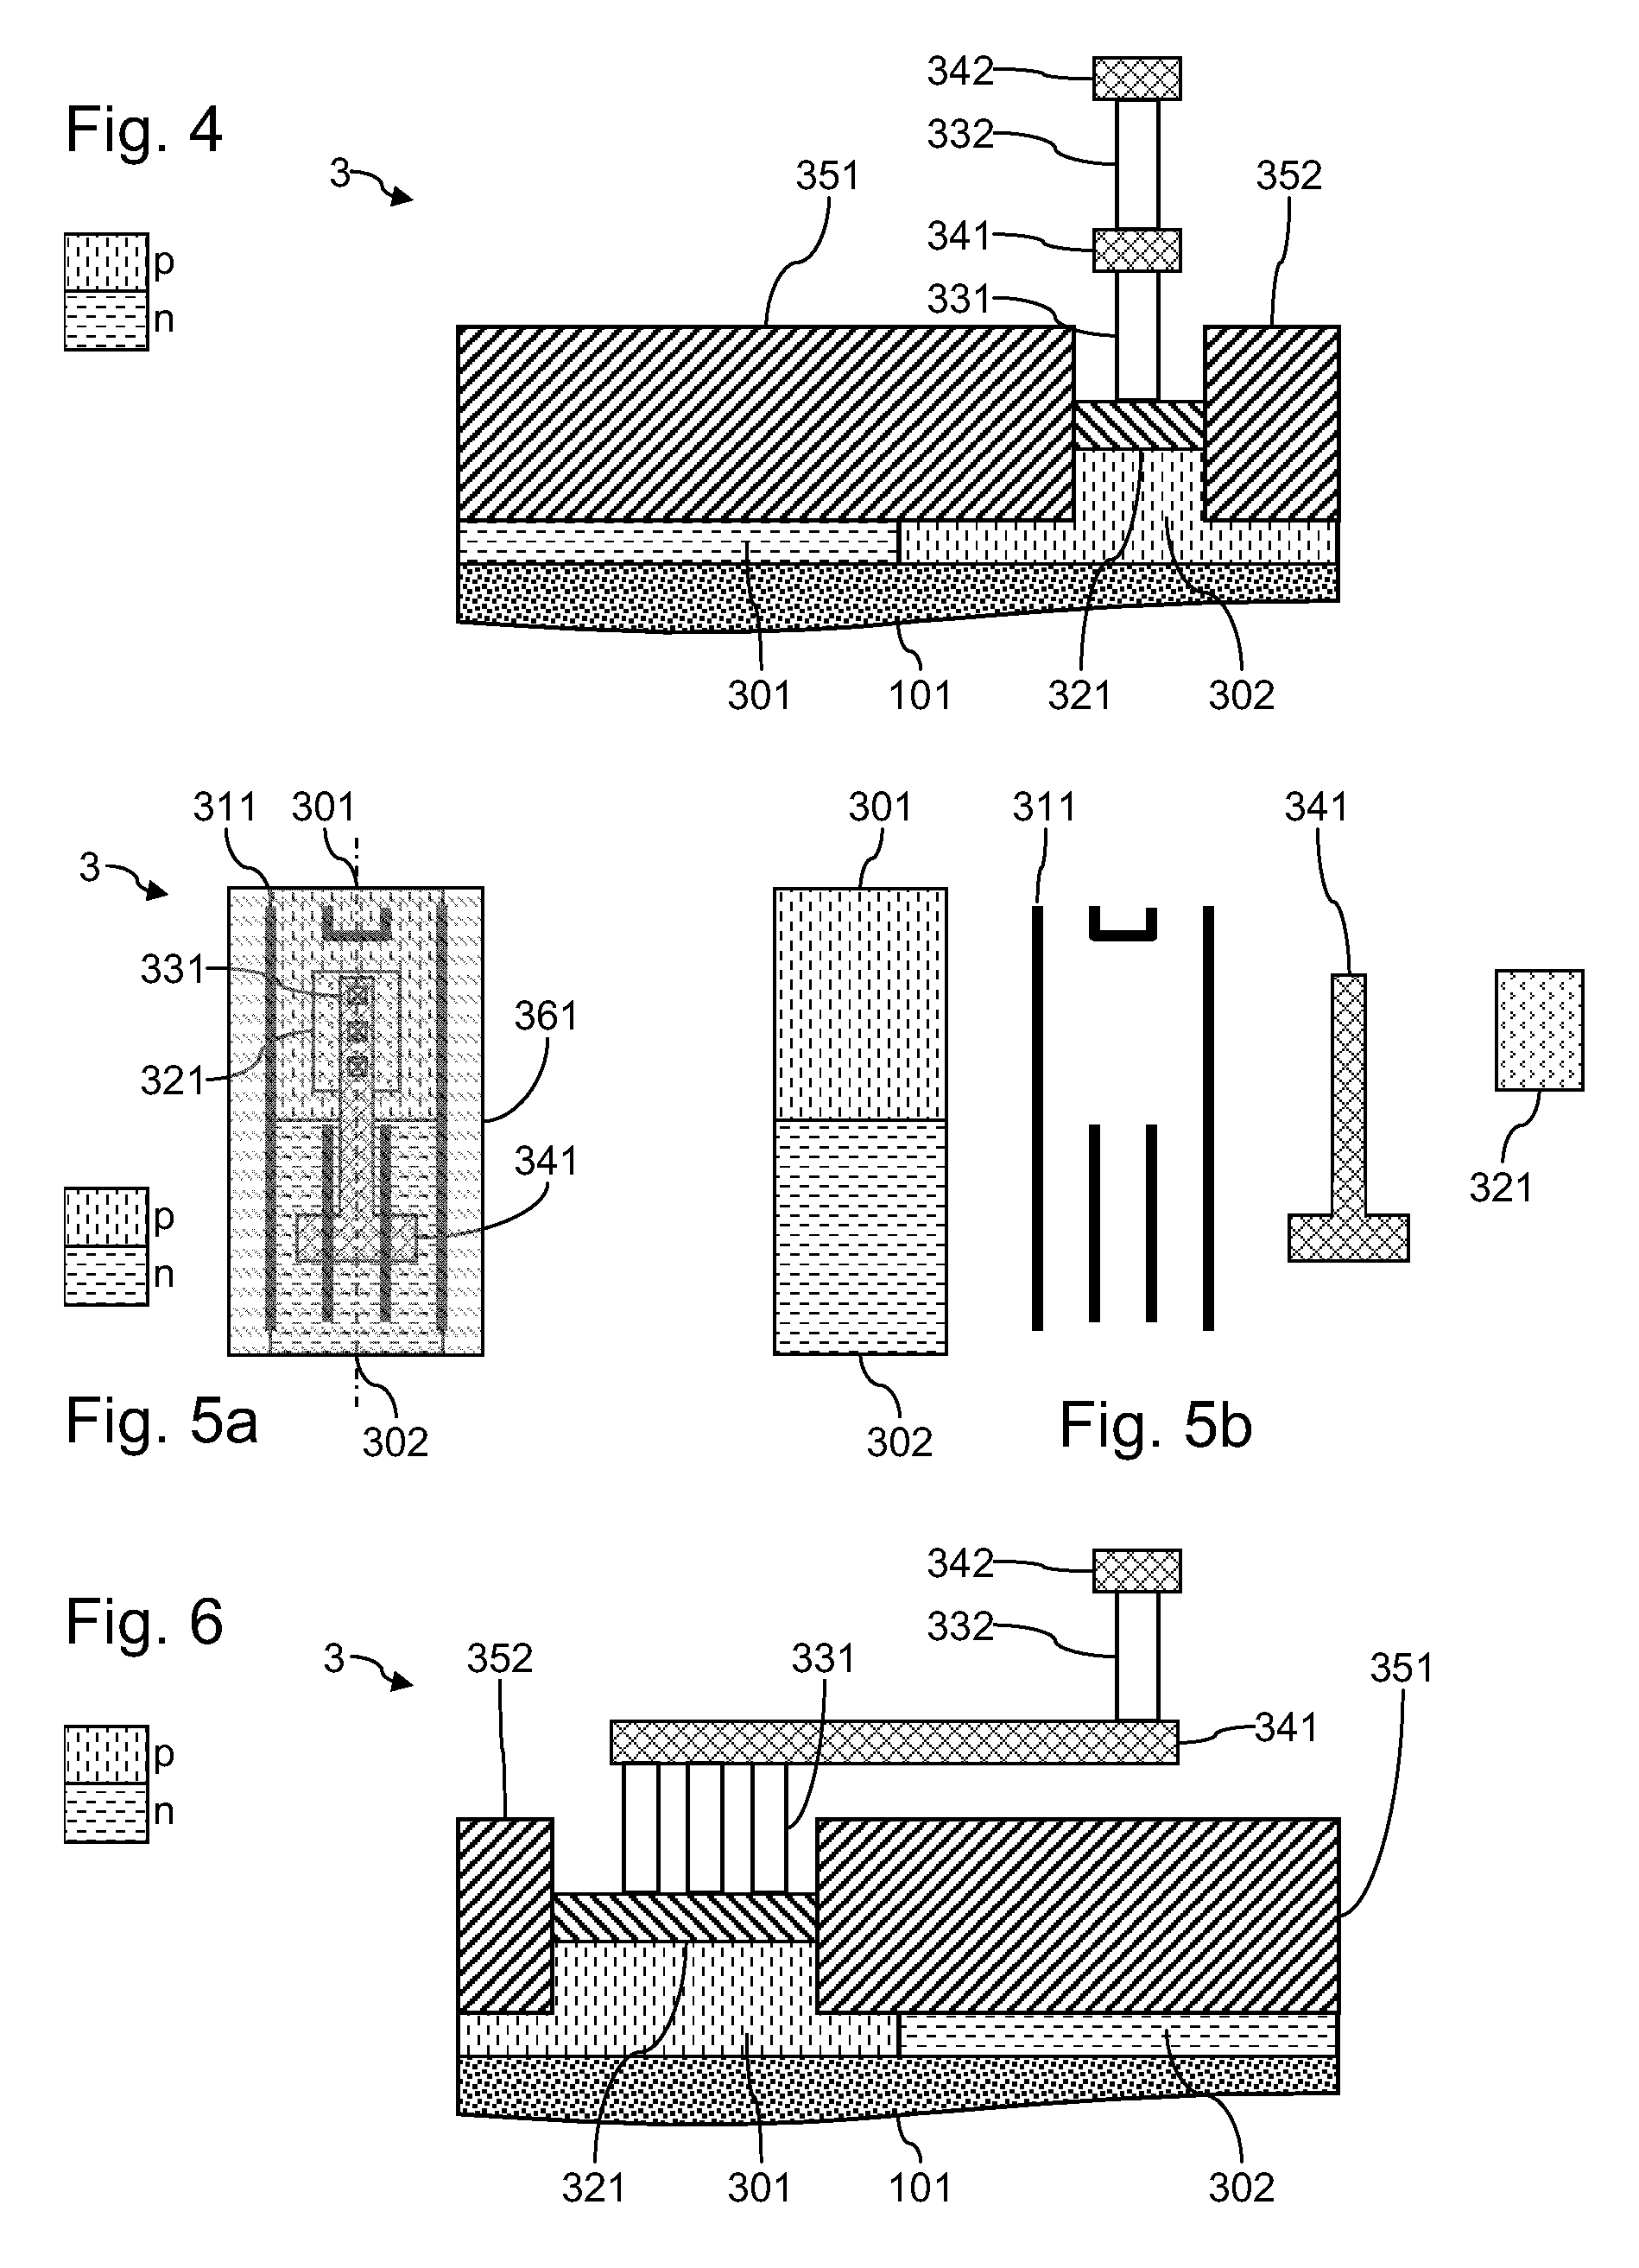 Method for generating a topography of an FDSOI integrated circuit